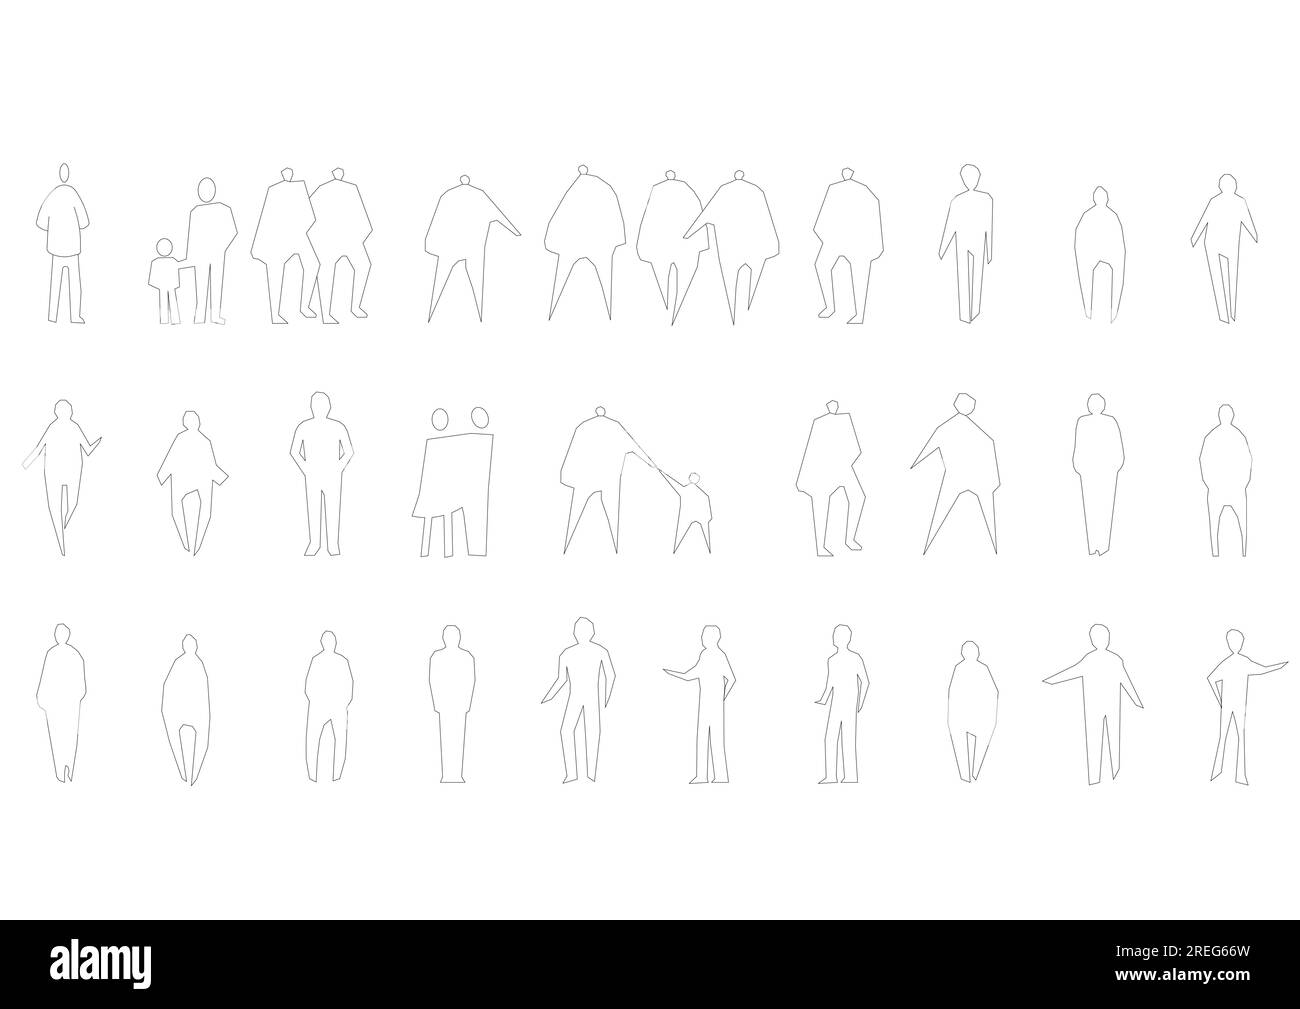 People Sketch Casual Group Of People Silhouettes Outline Hand Drawing  Illustration Stock Illustration - Download Image Now - iStock